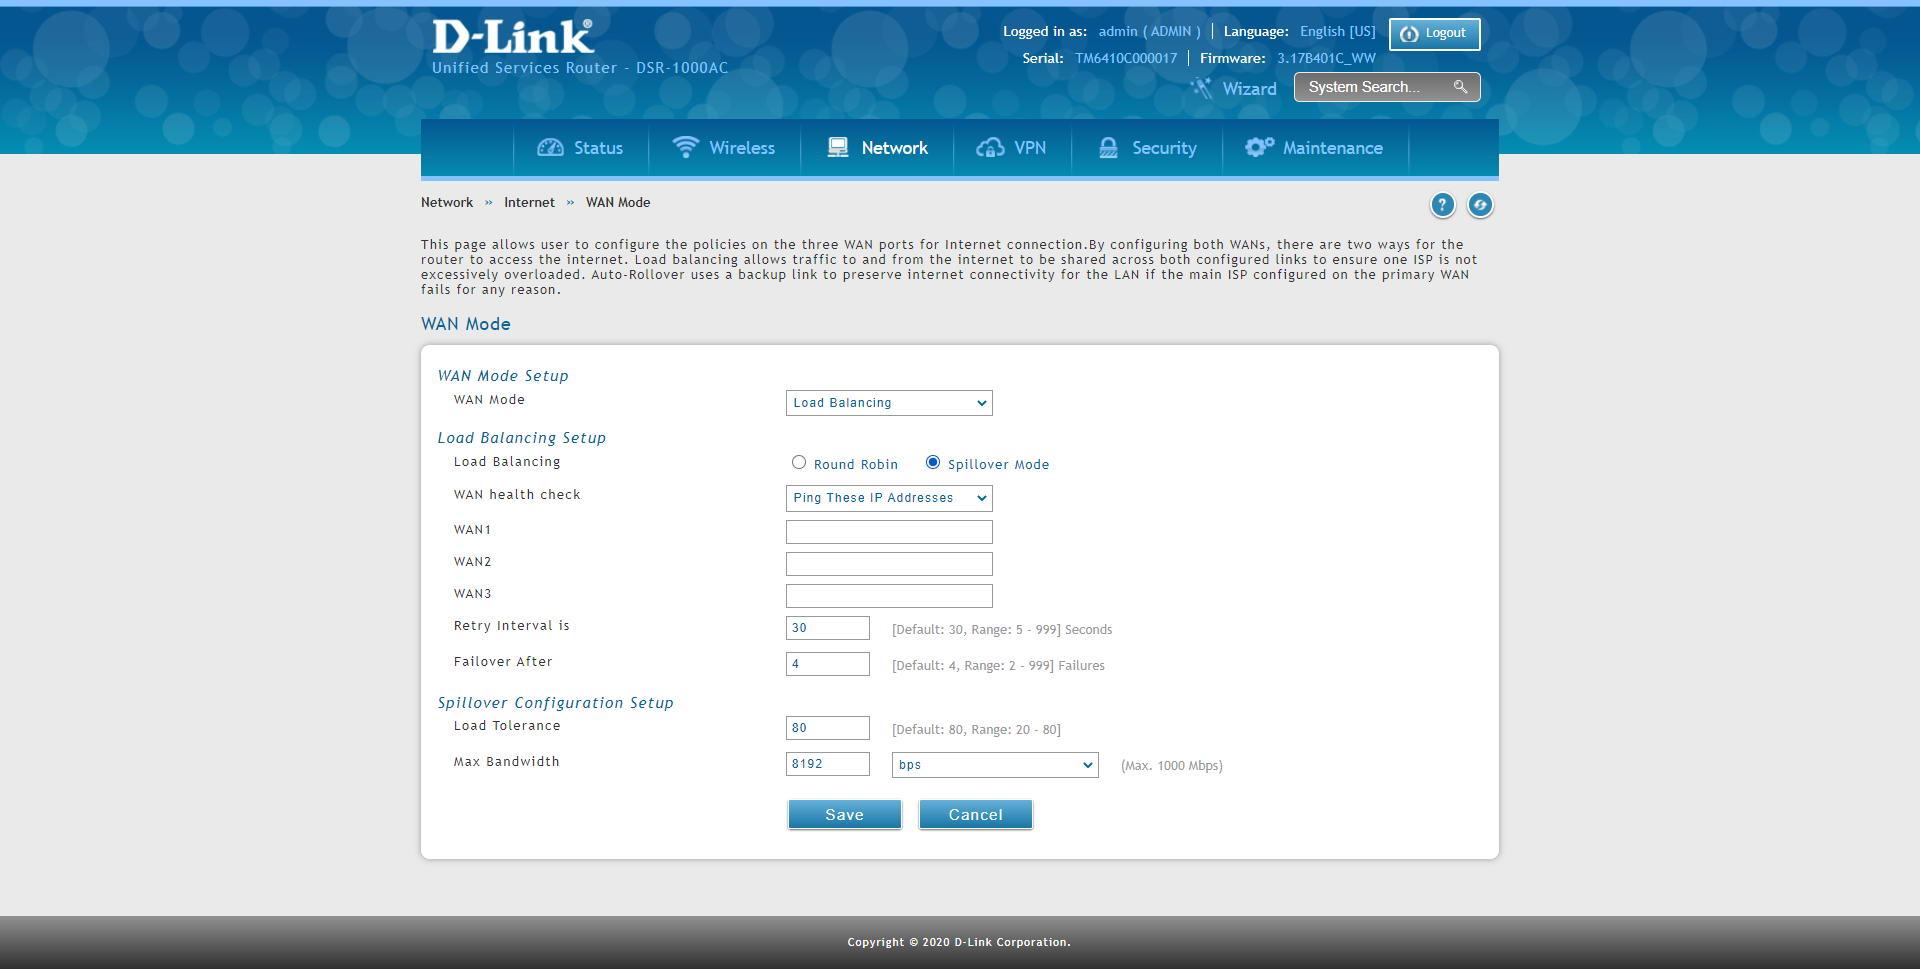 Configure two WANs on the D-Link DSR-1000AC router and load balancing